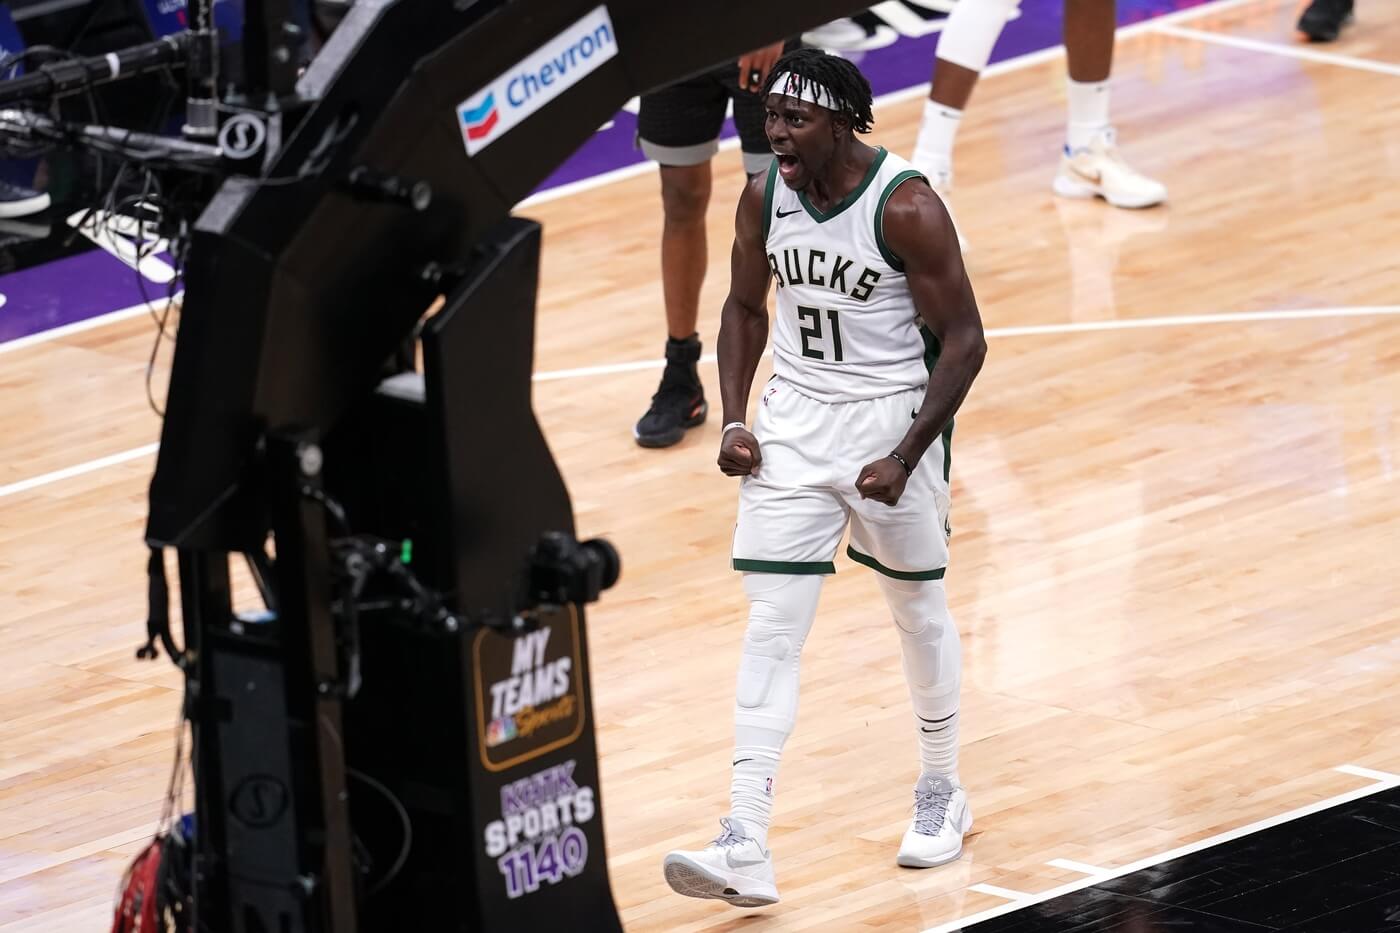 Apr 3, 2021; Sacramento, California, USA; Milwaukee Bucks guard Jrue Holiday (21) reacts after being fouled while making a shot against the Sacramento Kings in the fourth quarter at the Golden 1 Center. Mandatory Credit: Cary Edmondson-USA TODAY Sports